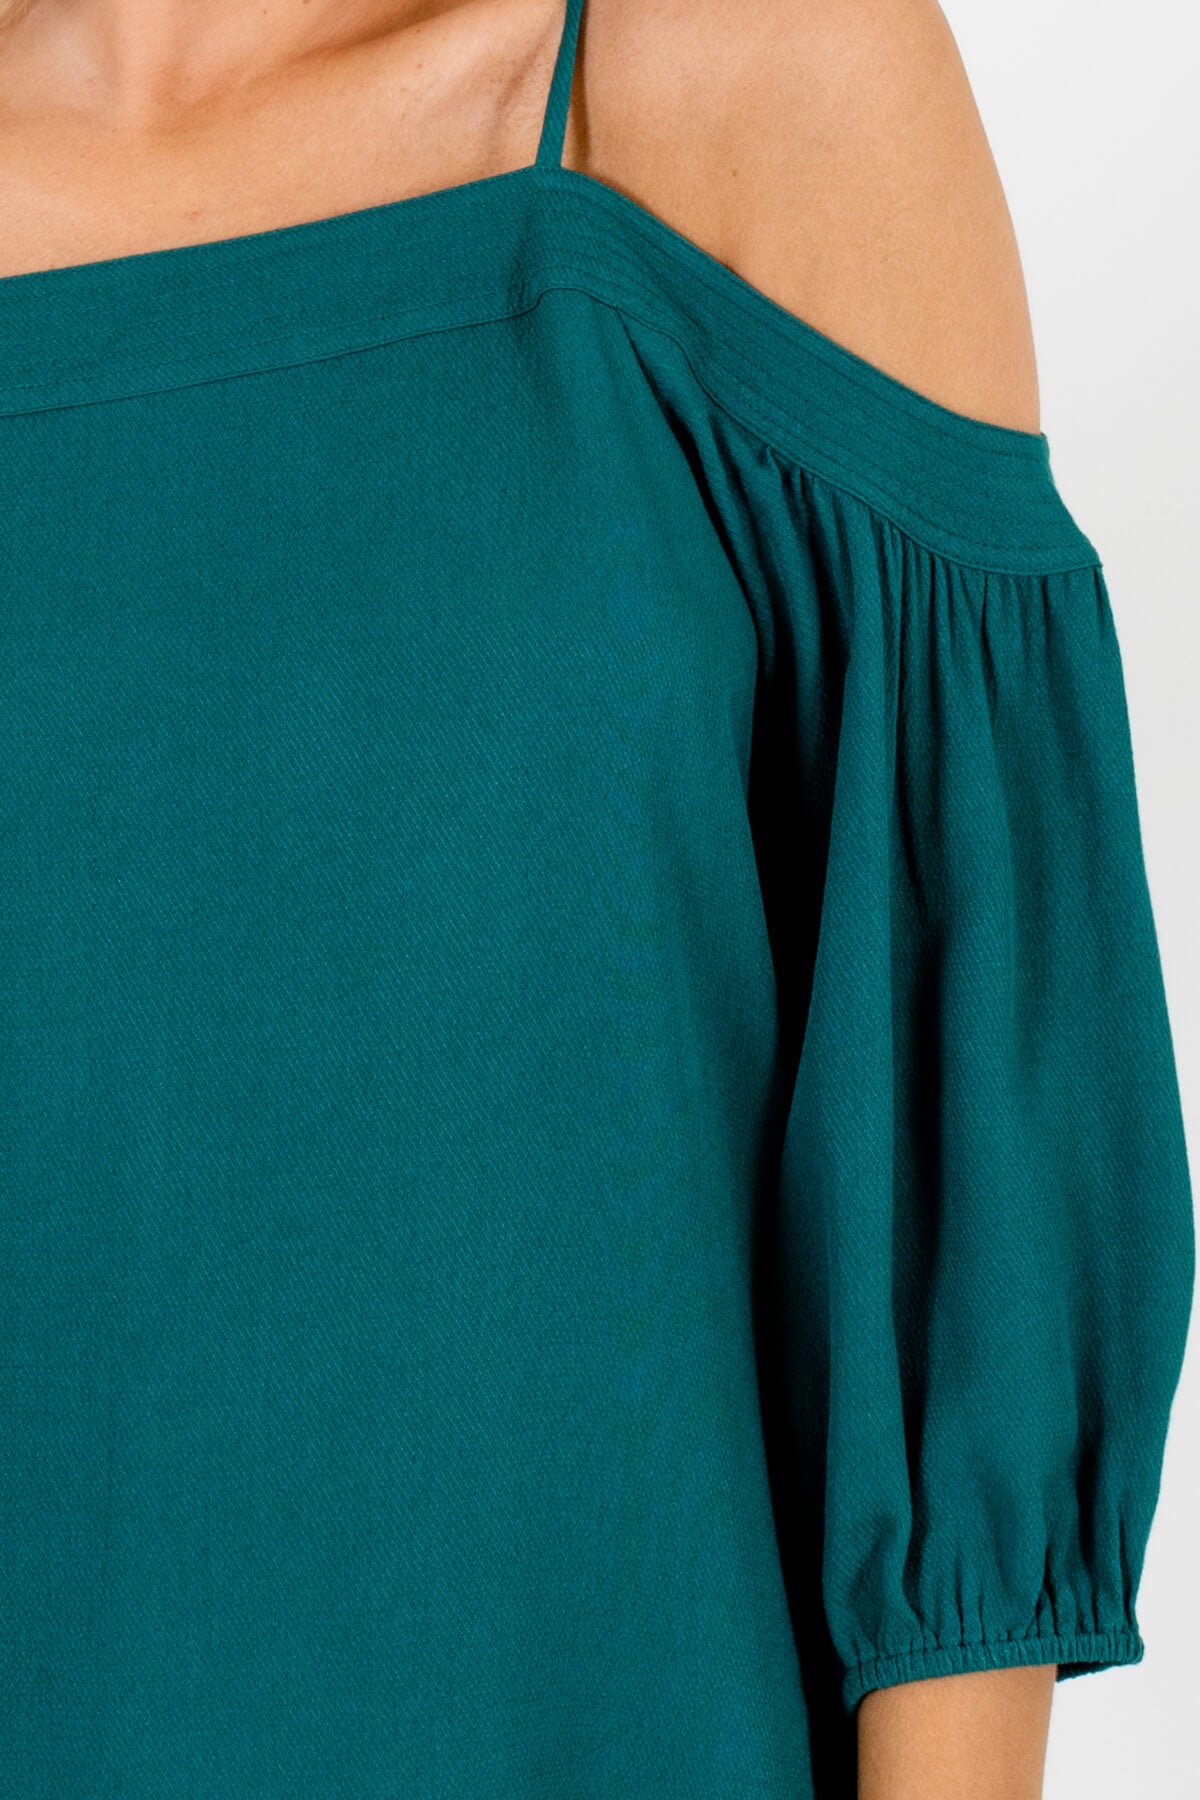 Teal Green Affordable Online Boutique Clothing for Women